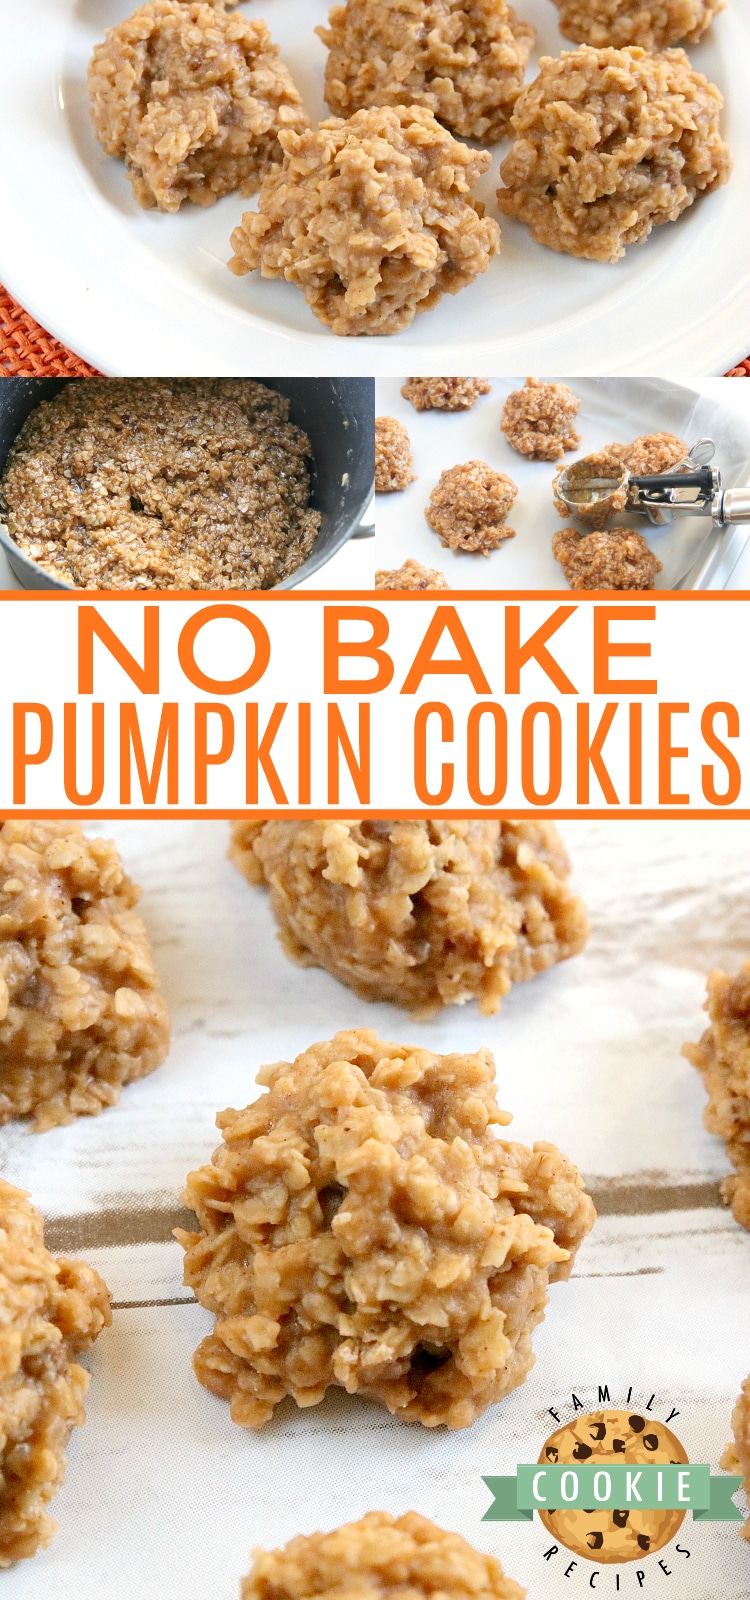 No Bake Pumpkin Cookies are full of oats and pumpkin flavor and come together in minutes without ever turning the oven on. This easy no bake cookie recipe is quick, delicious and perfect for fall! via @buttergirls